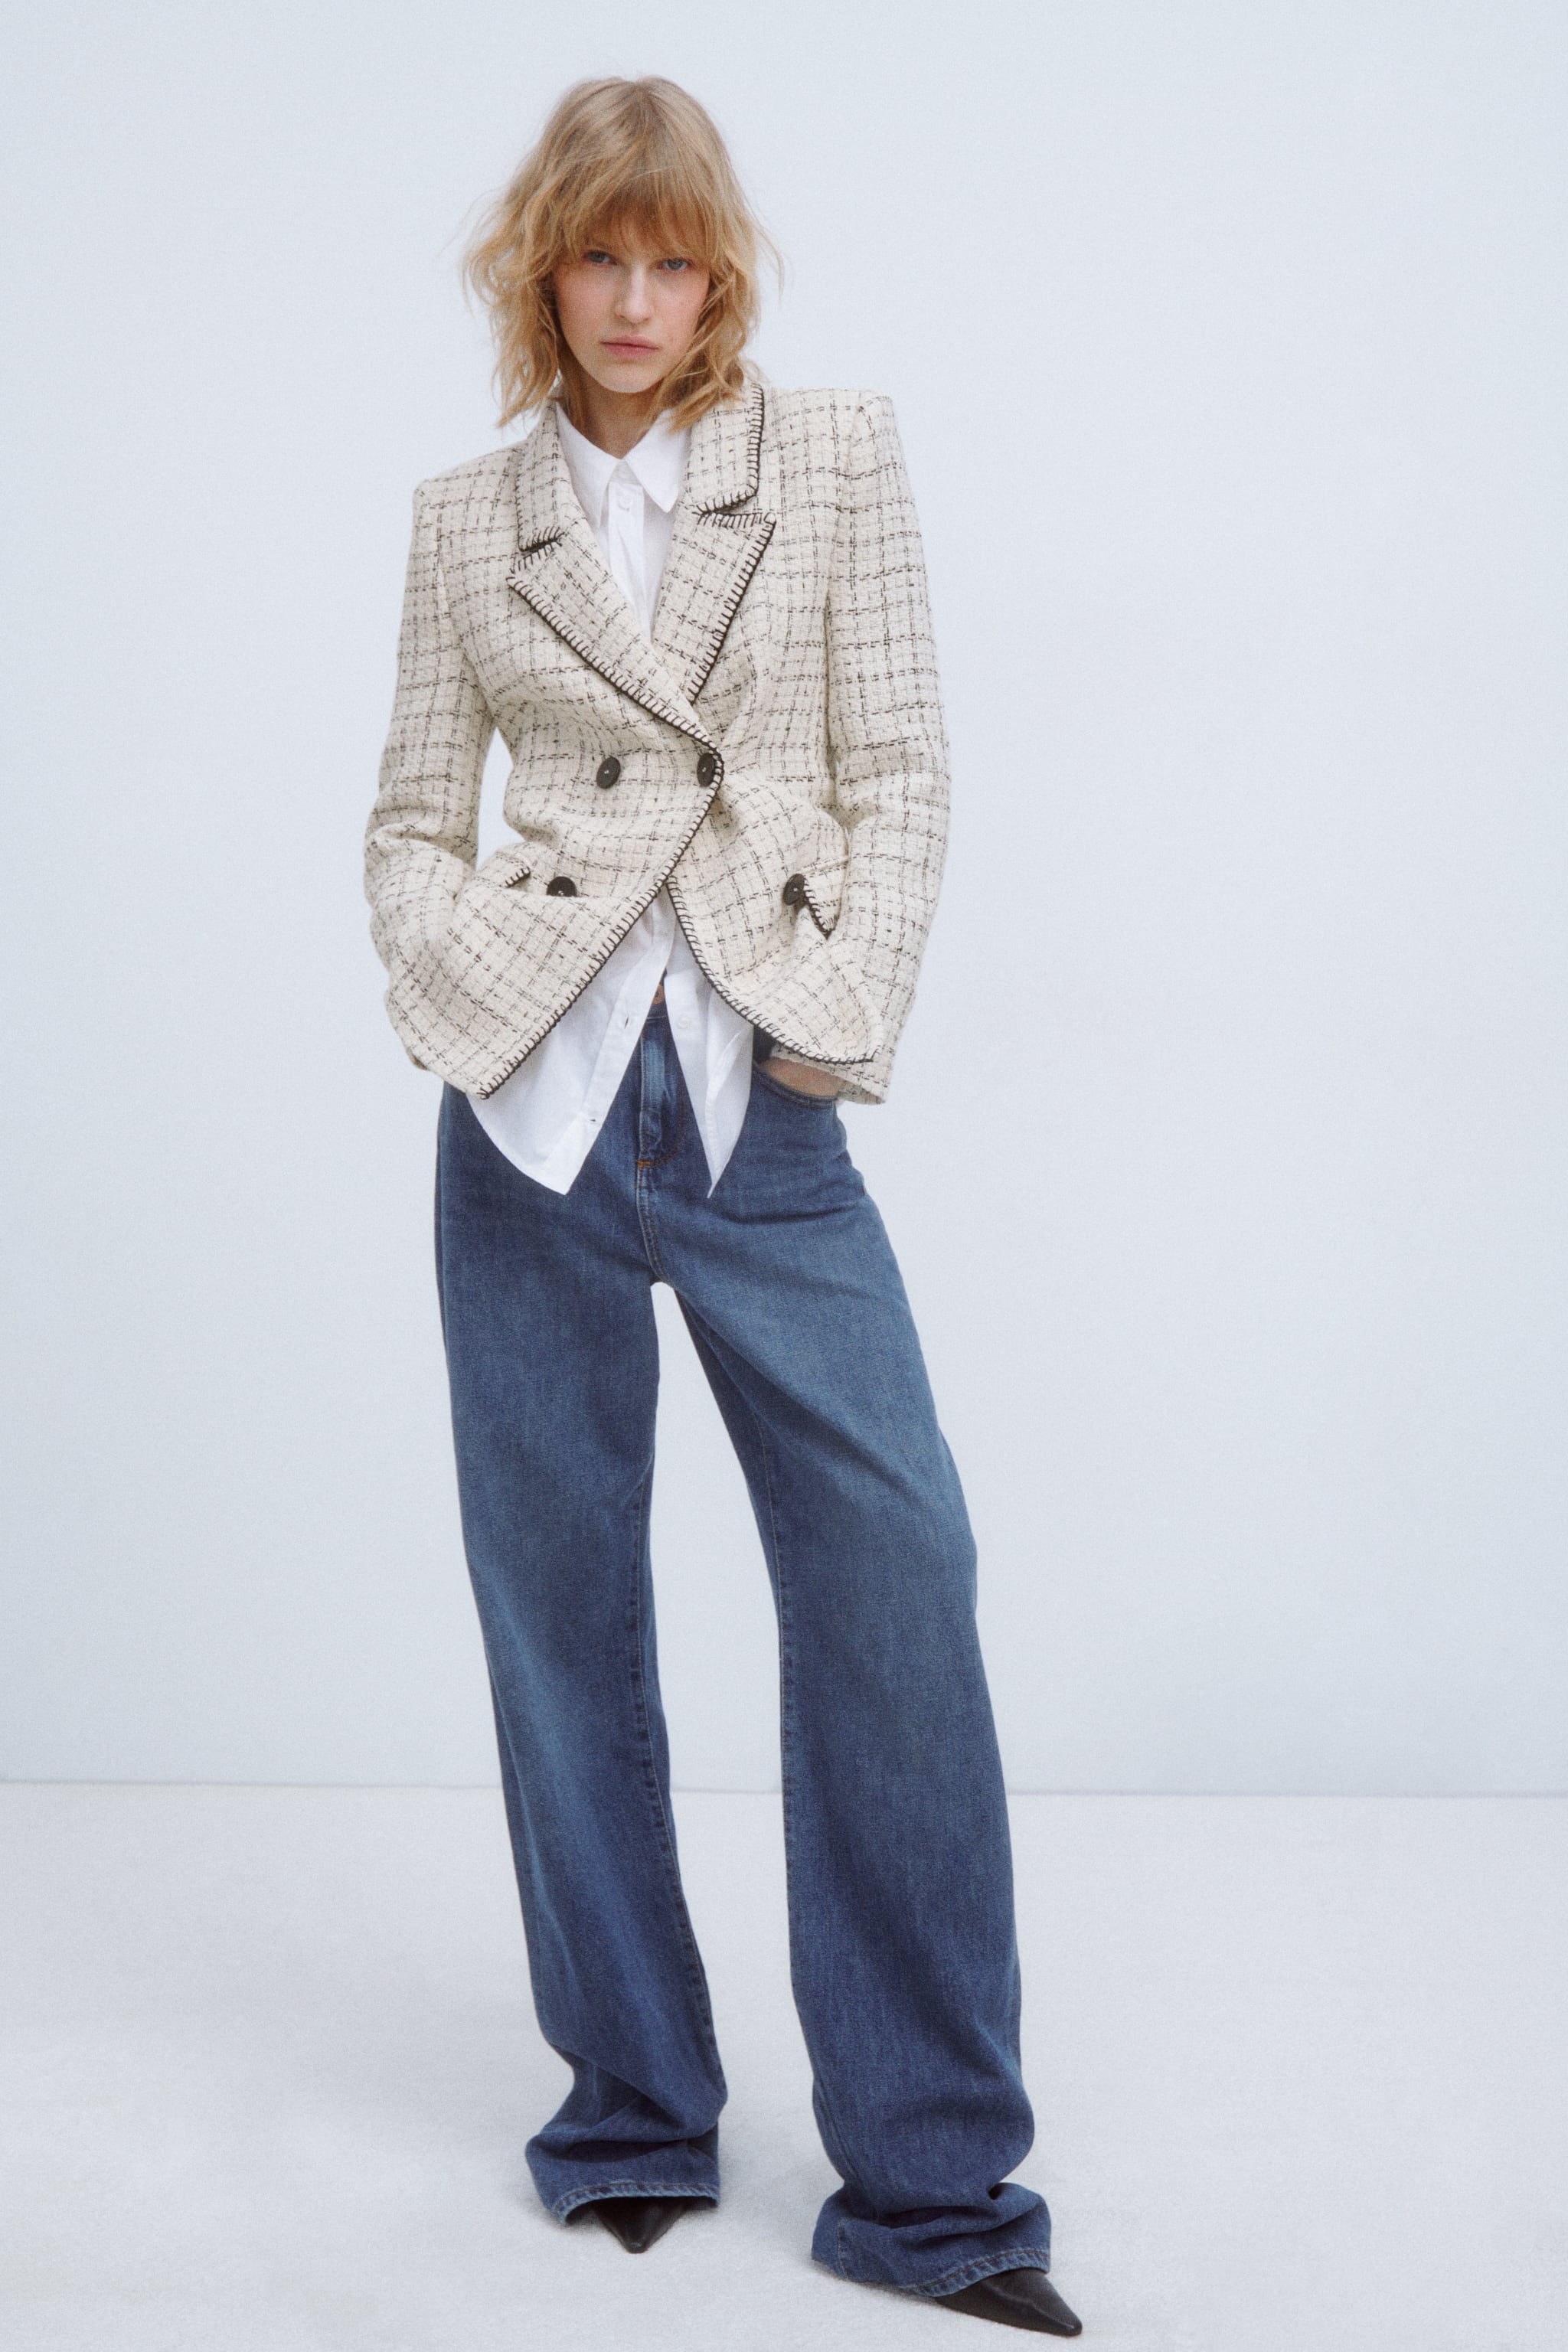 31 Seriously Chic Tweed Pieces That Remind Me of Chanel | Who What Wear